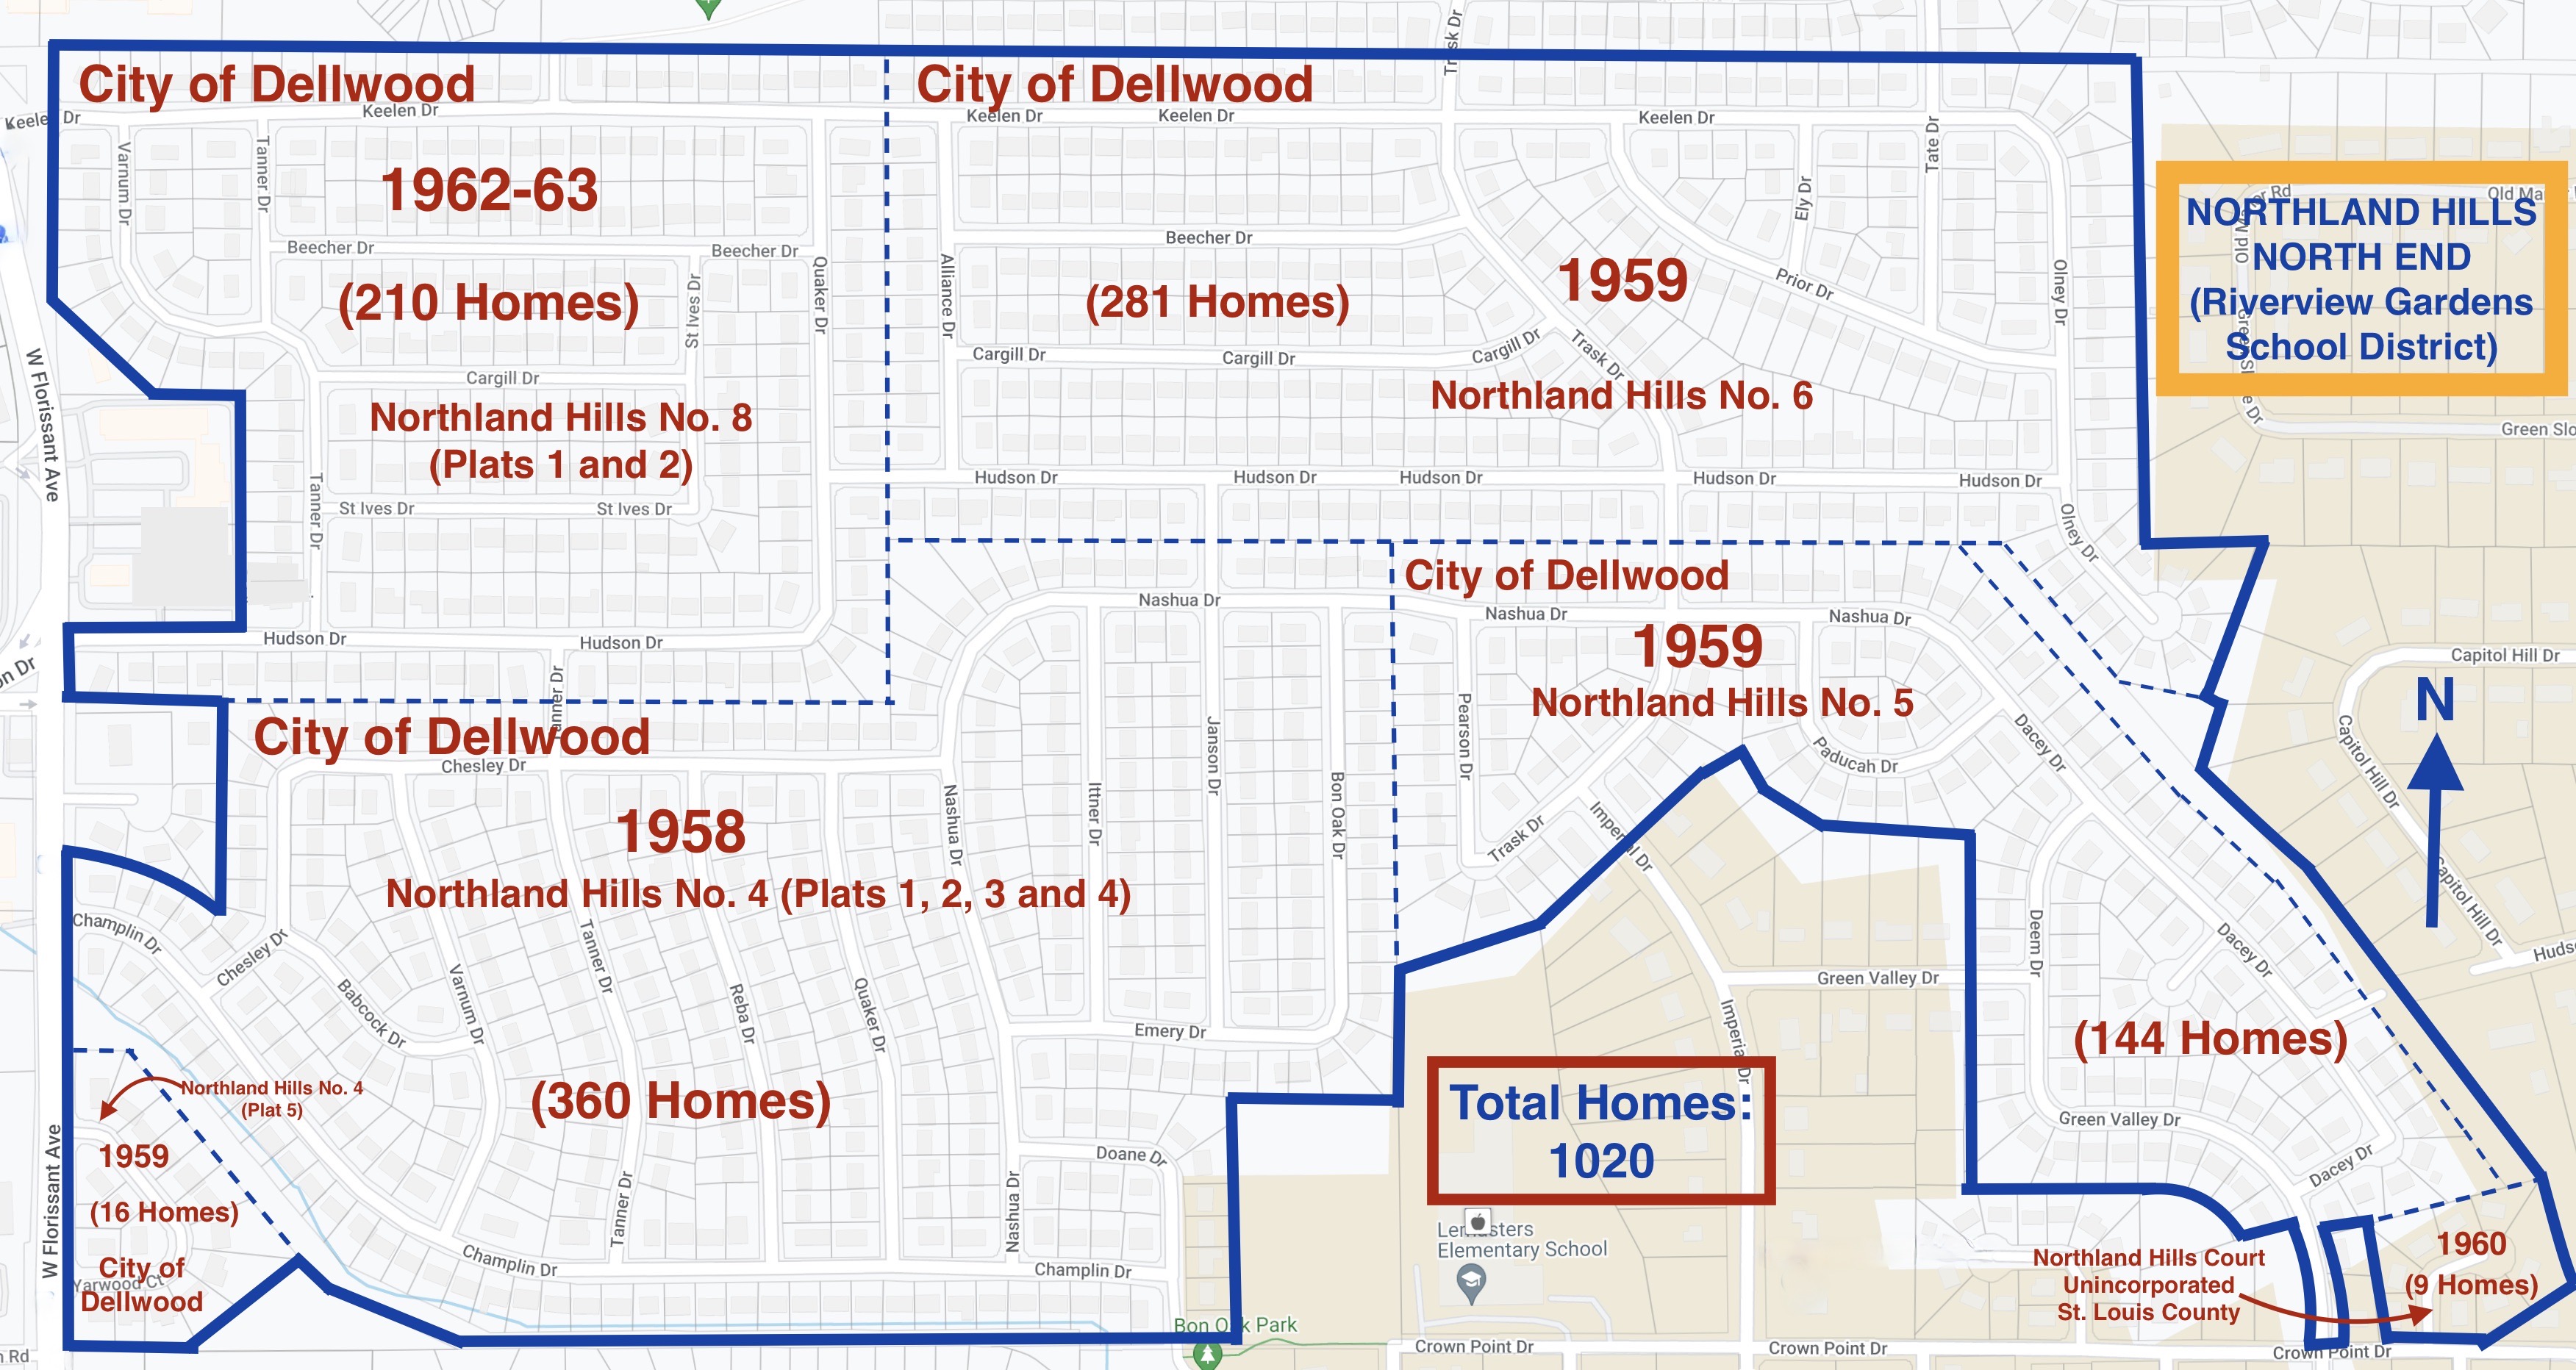 NORTHLAND HILLS NORTH END SUBDIVISION MAP